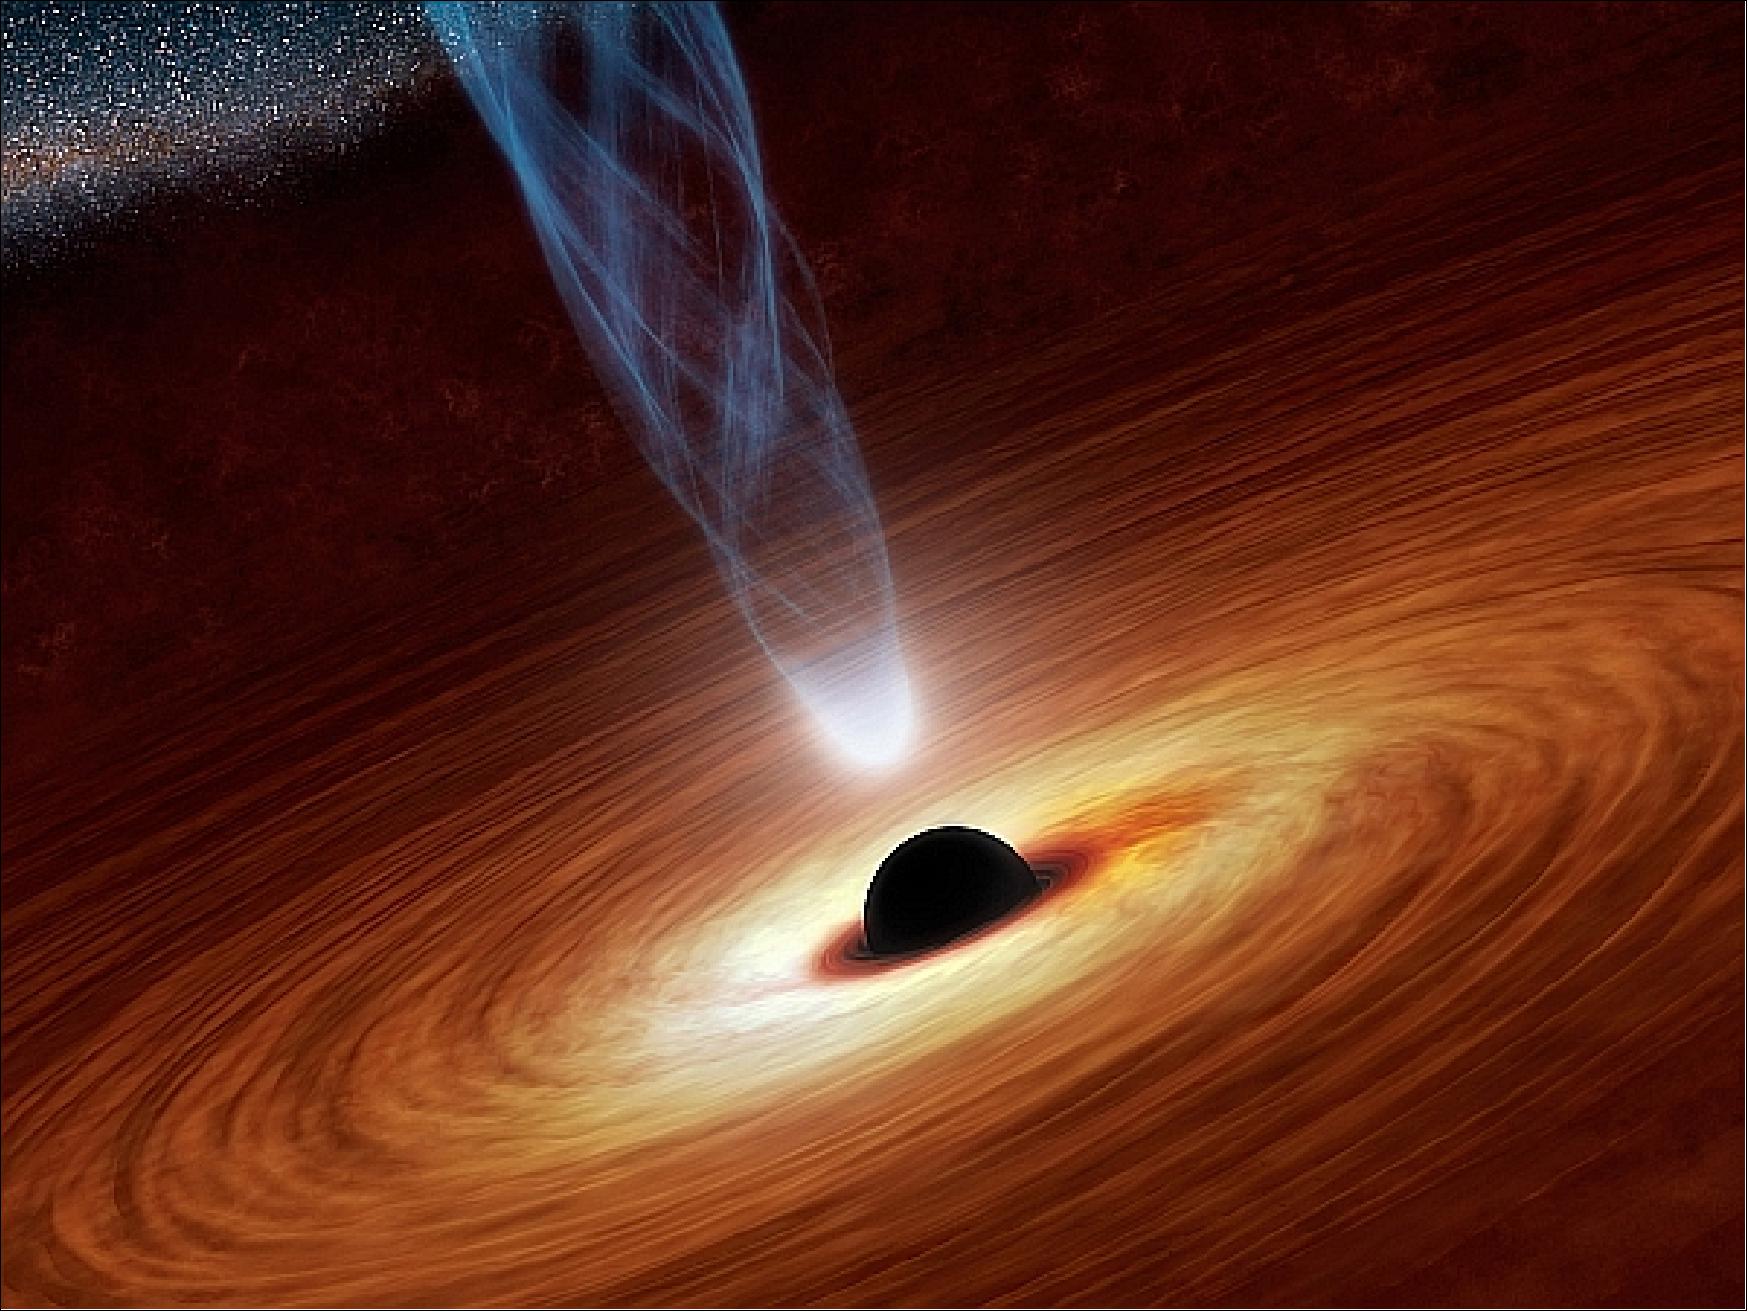 Figure 44: The artist's concept illustrates a supermassive black hole with millions to billions times the mass of our sun. Supermassive black holes are enormously dense objects buried at the hearts of galaxies (image credit: NASA/JPL)